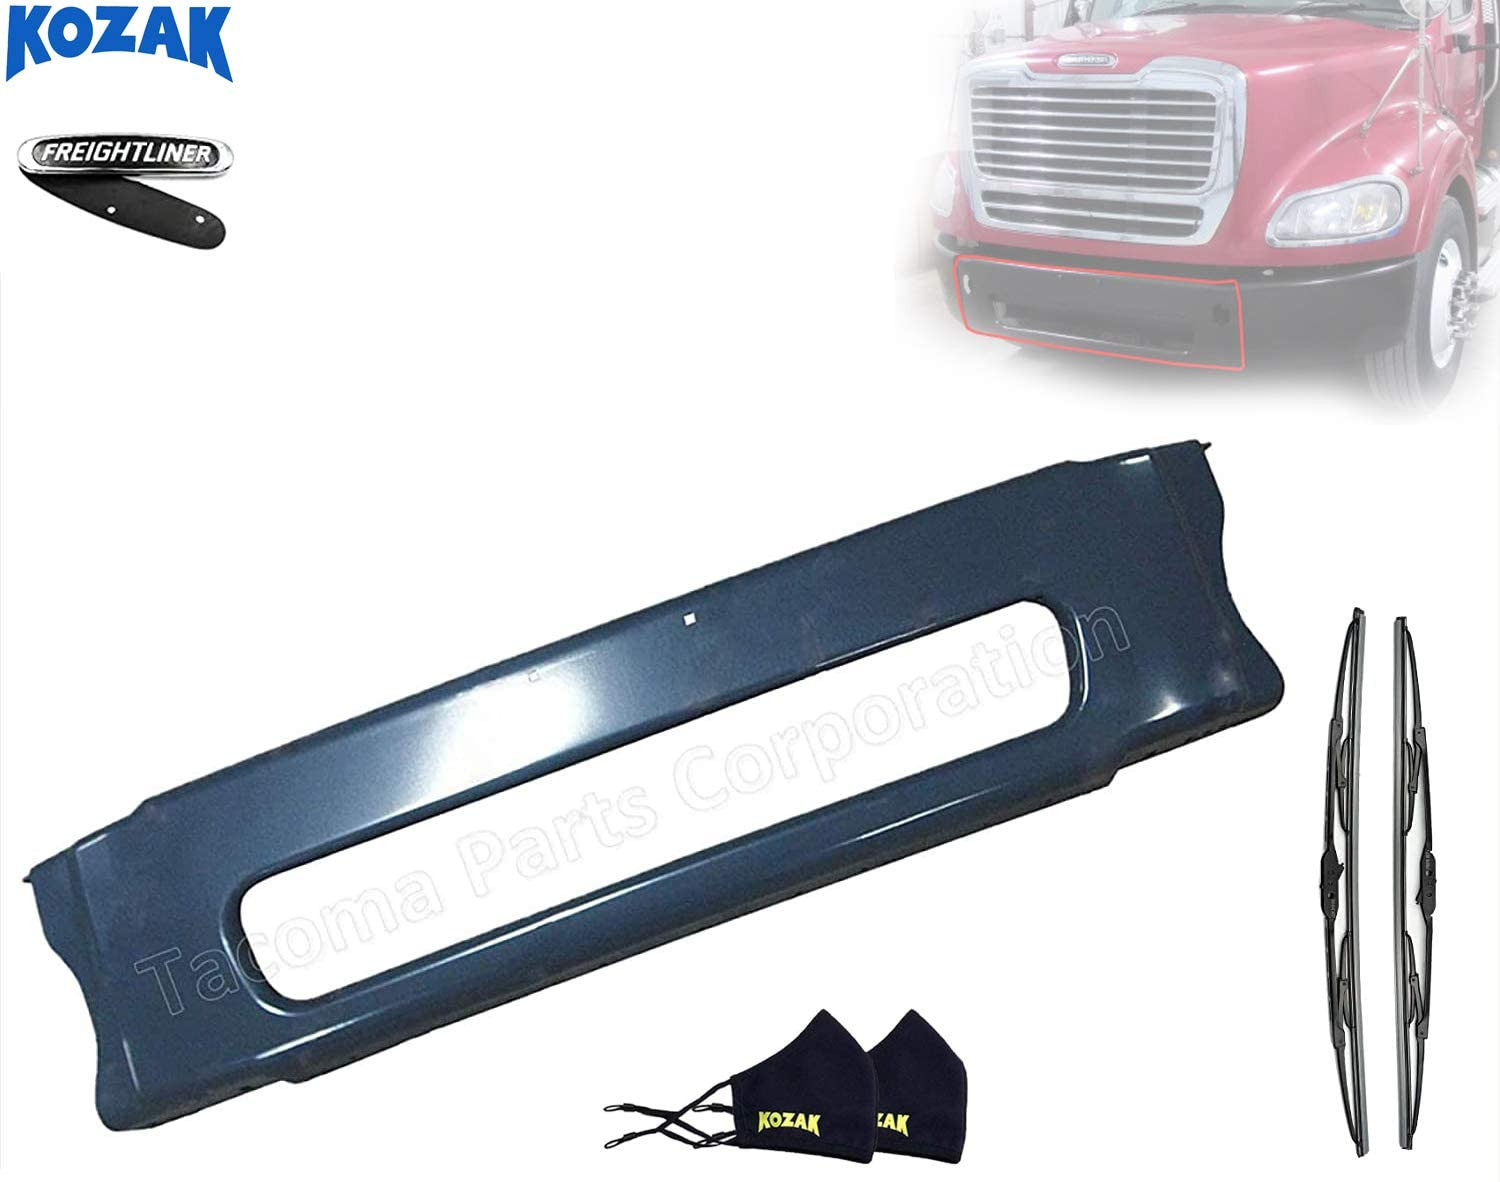 Break Preesure Switch for M2 Freightlinne Freightliner M2 Truck Steel Front Center Bumper for Freightliner M2 Business Class 106 112 03-12 Plus Freightliner Logo, 2x 22" Windshield Wipers, and ...